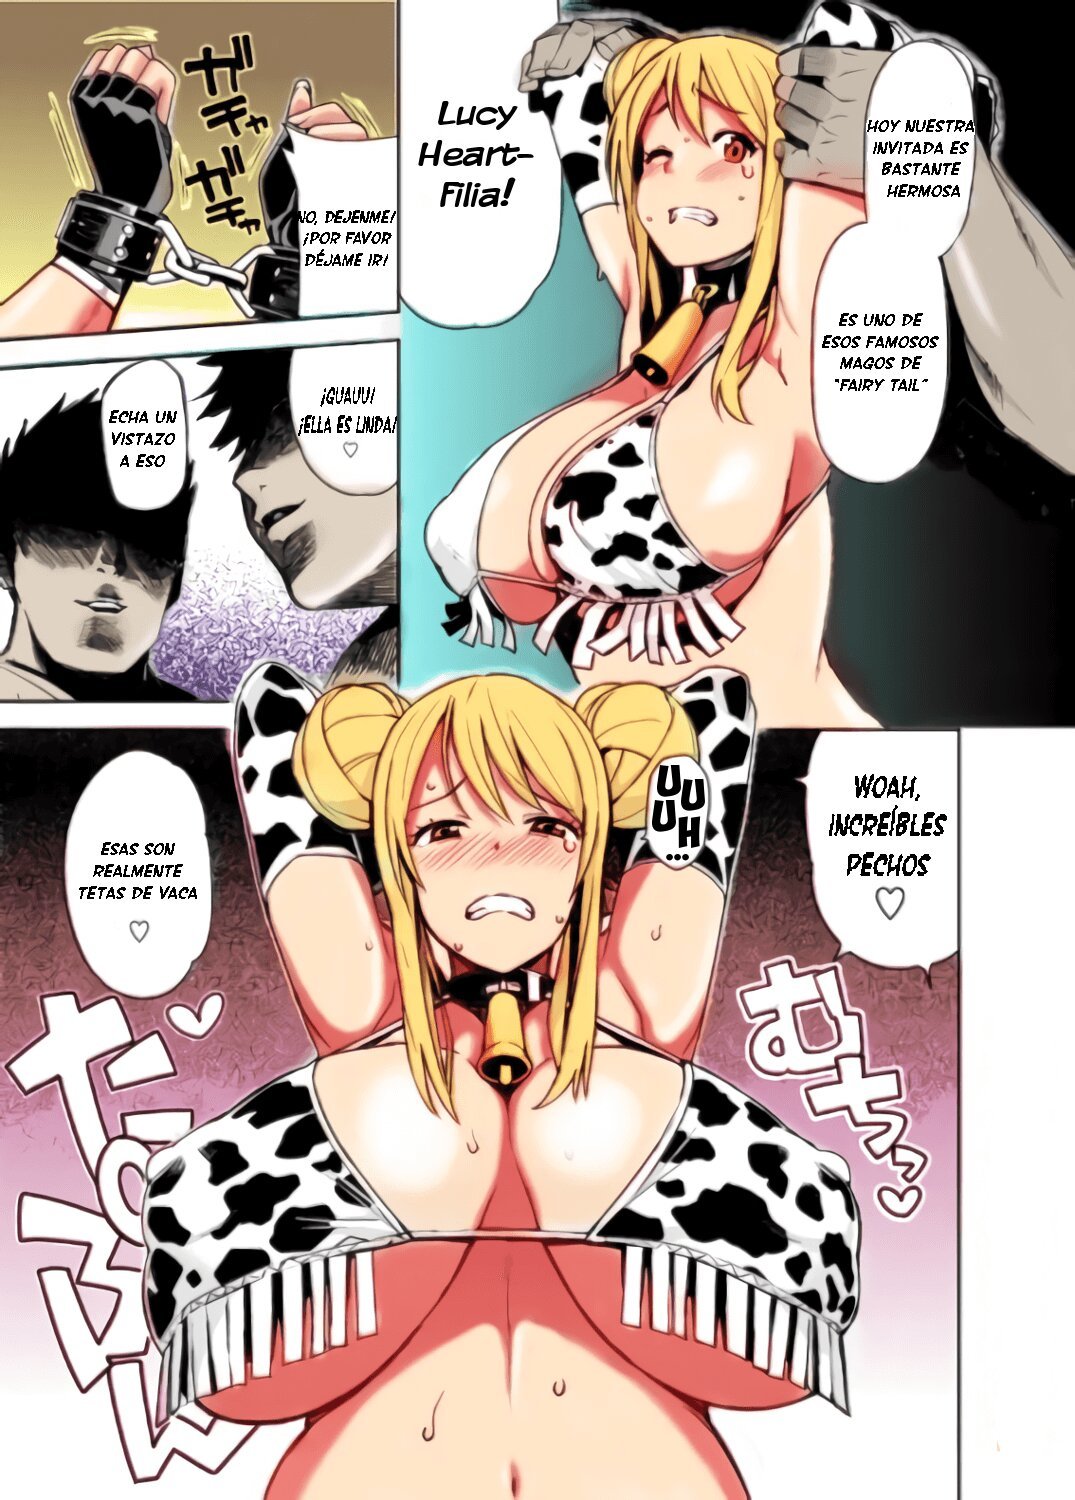 Witch Bitch Collection Vol 1 color sin censura - 1